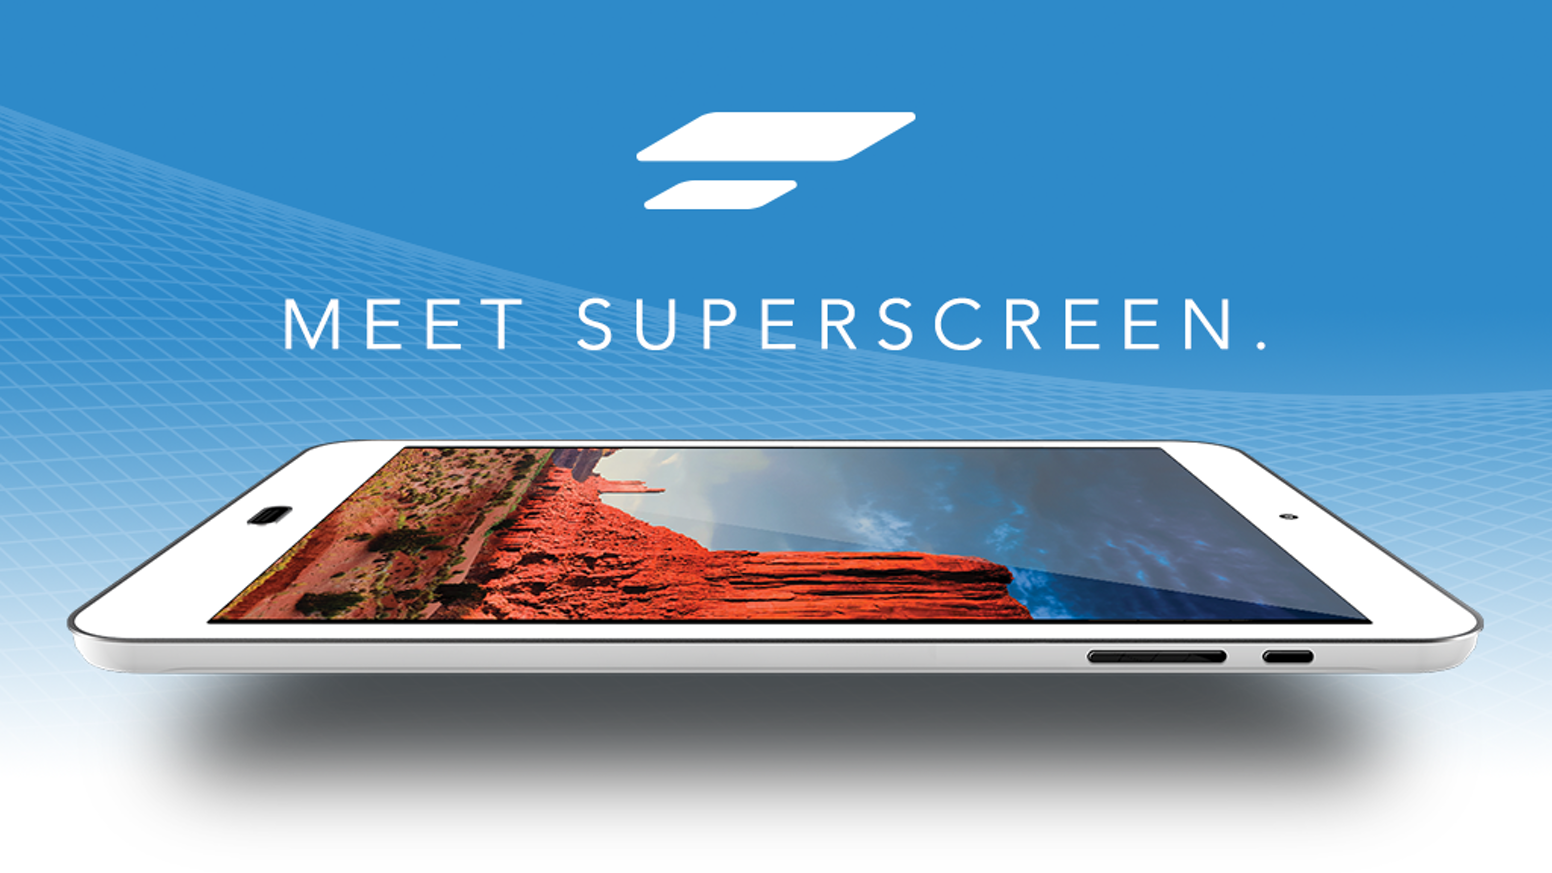 Superscreen – Supercharge your phone with a 10.1″ HD display